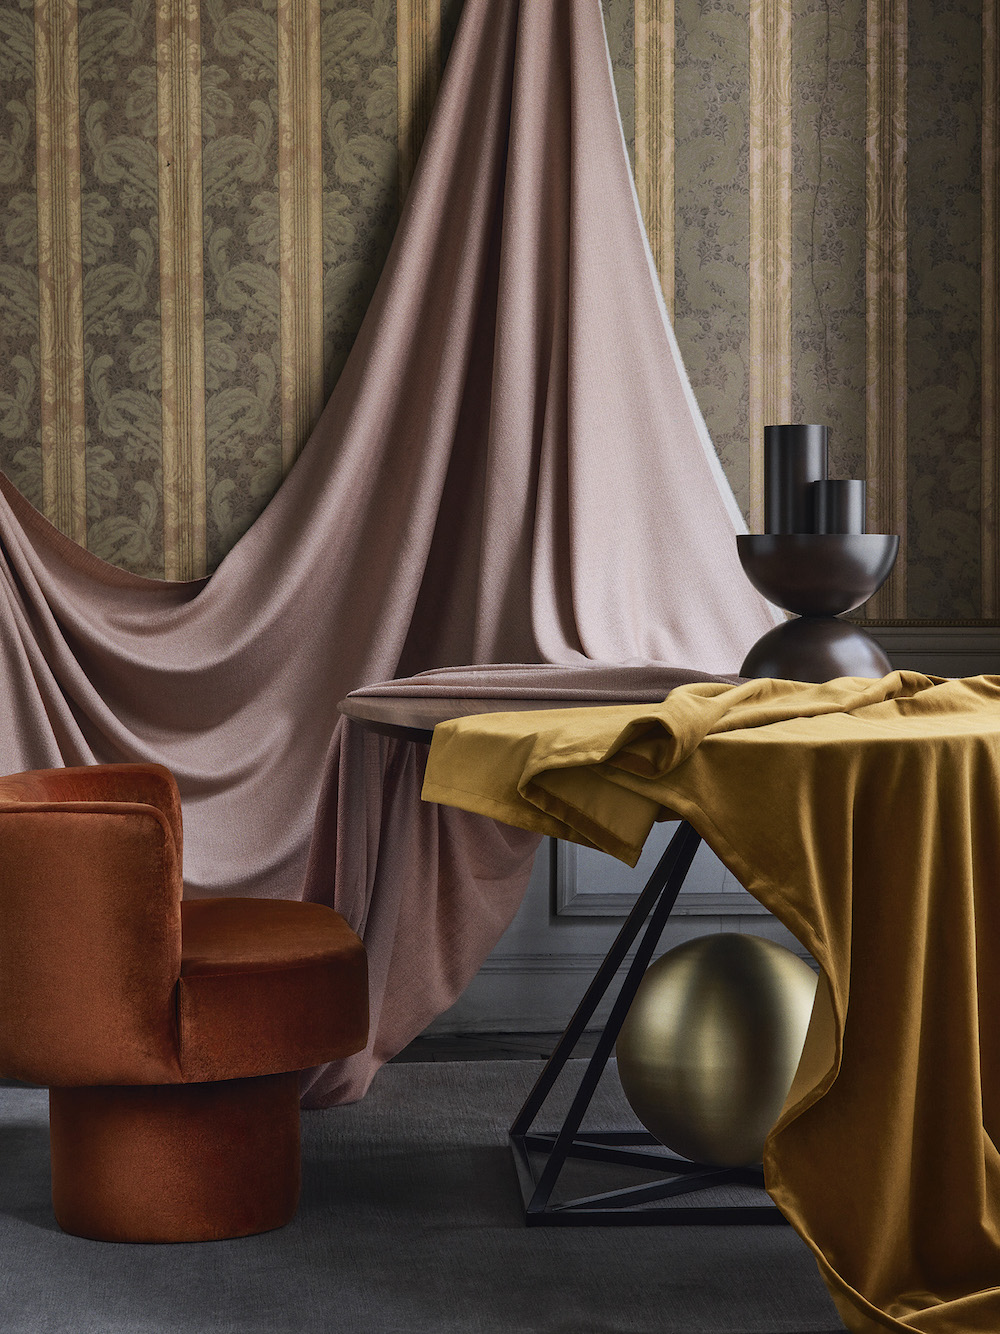 Various textiles draped over tables